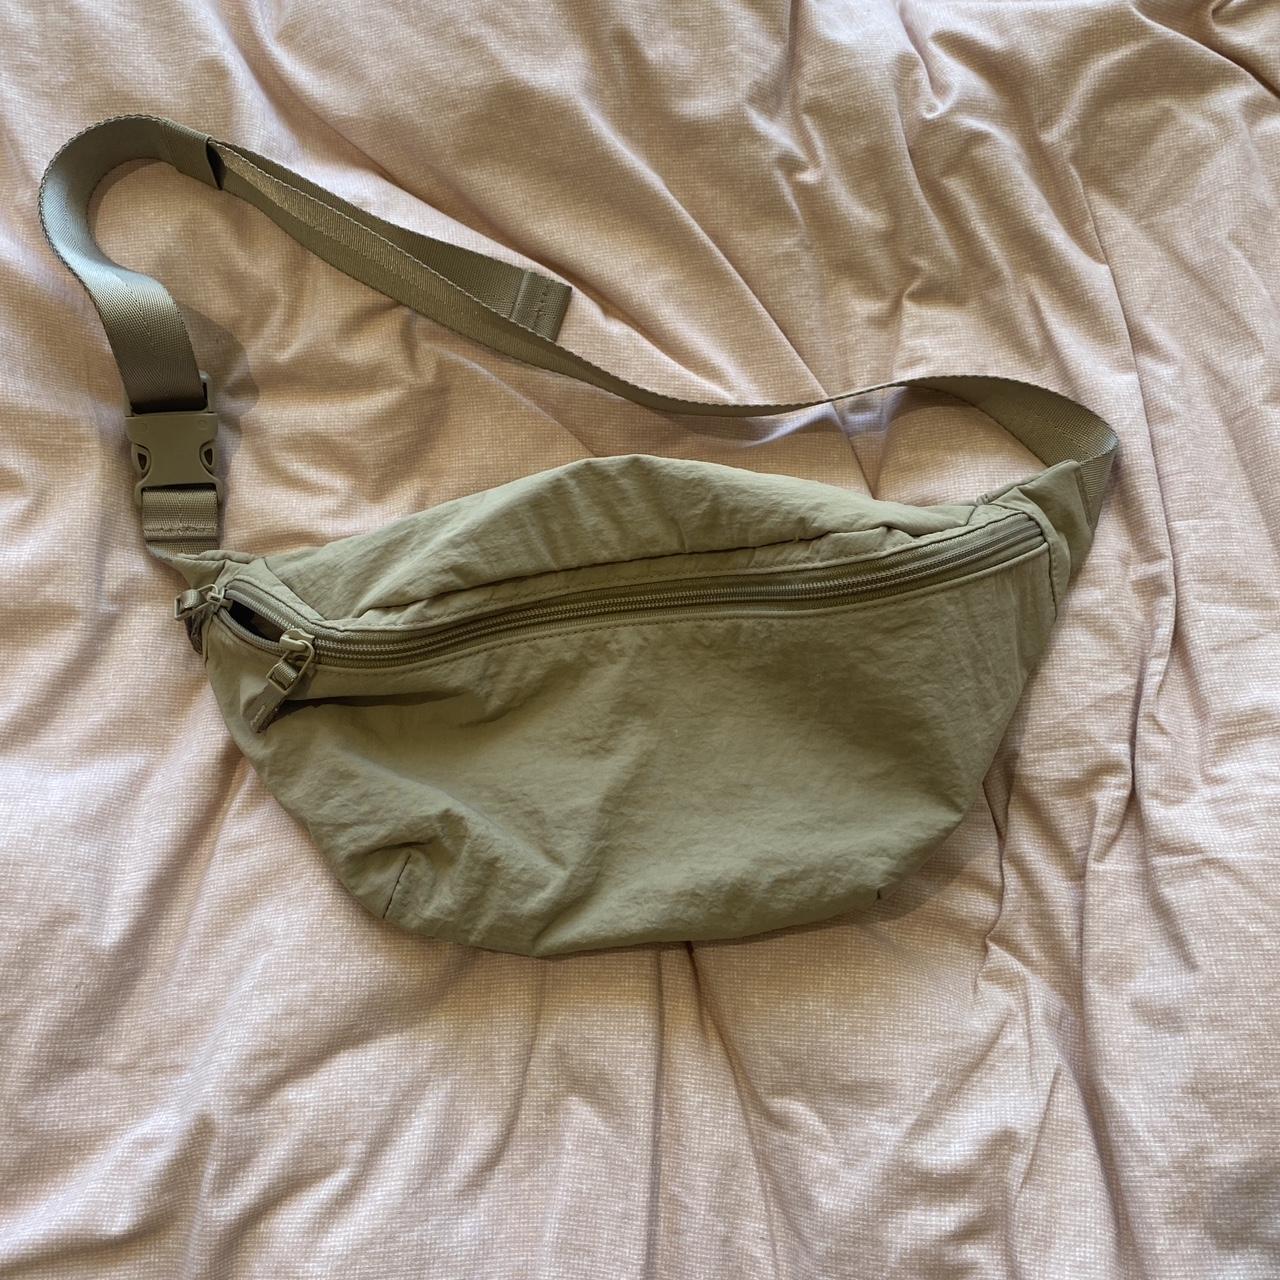 uniqlo fanny pack in a light khaki colour (its much... - Depop